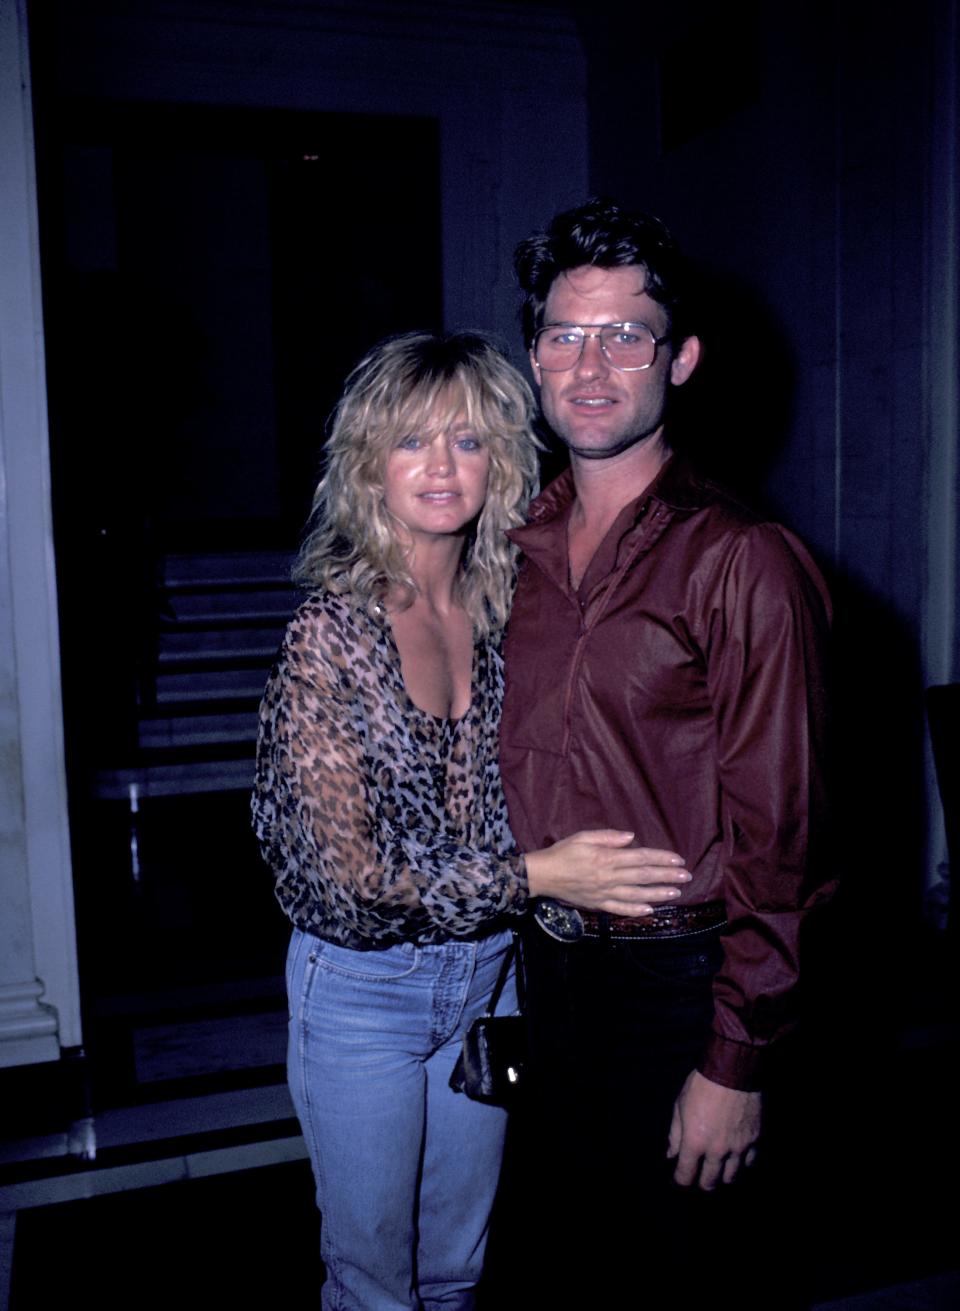 Goldie Hawn and Kurt Russell, photographed in 1983.